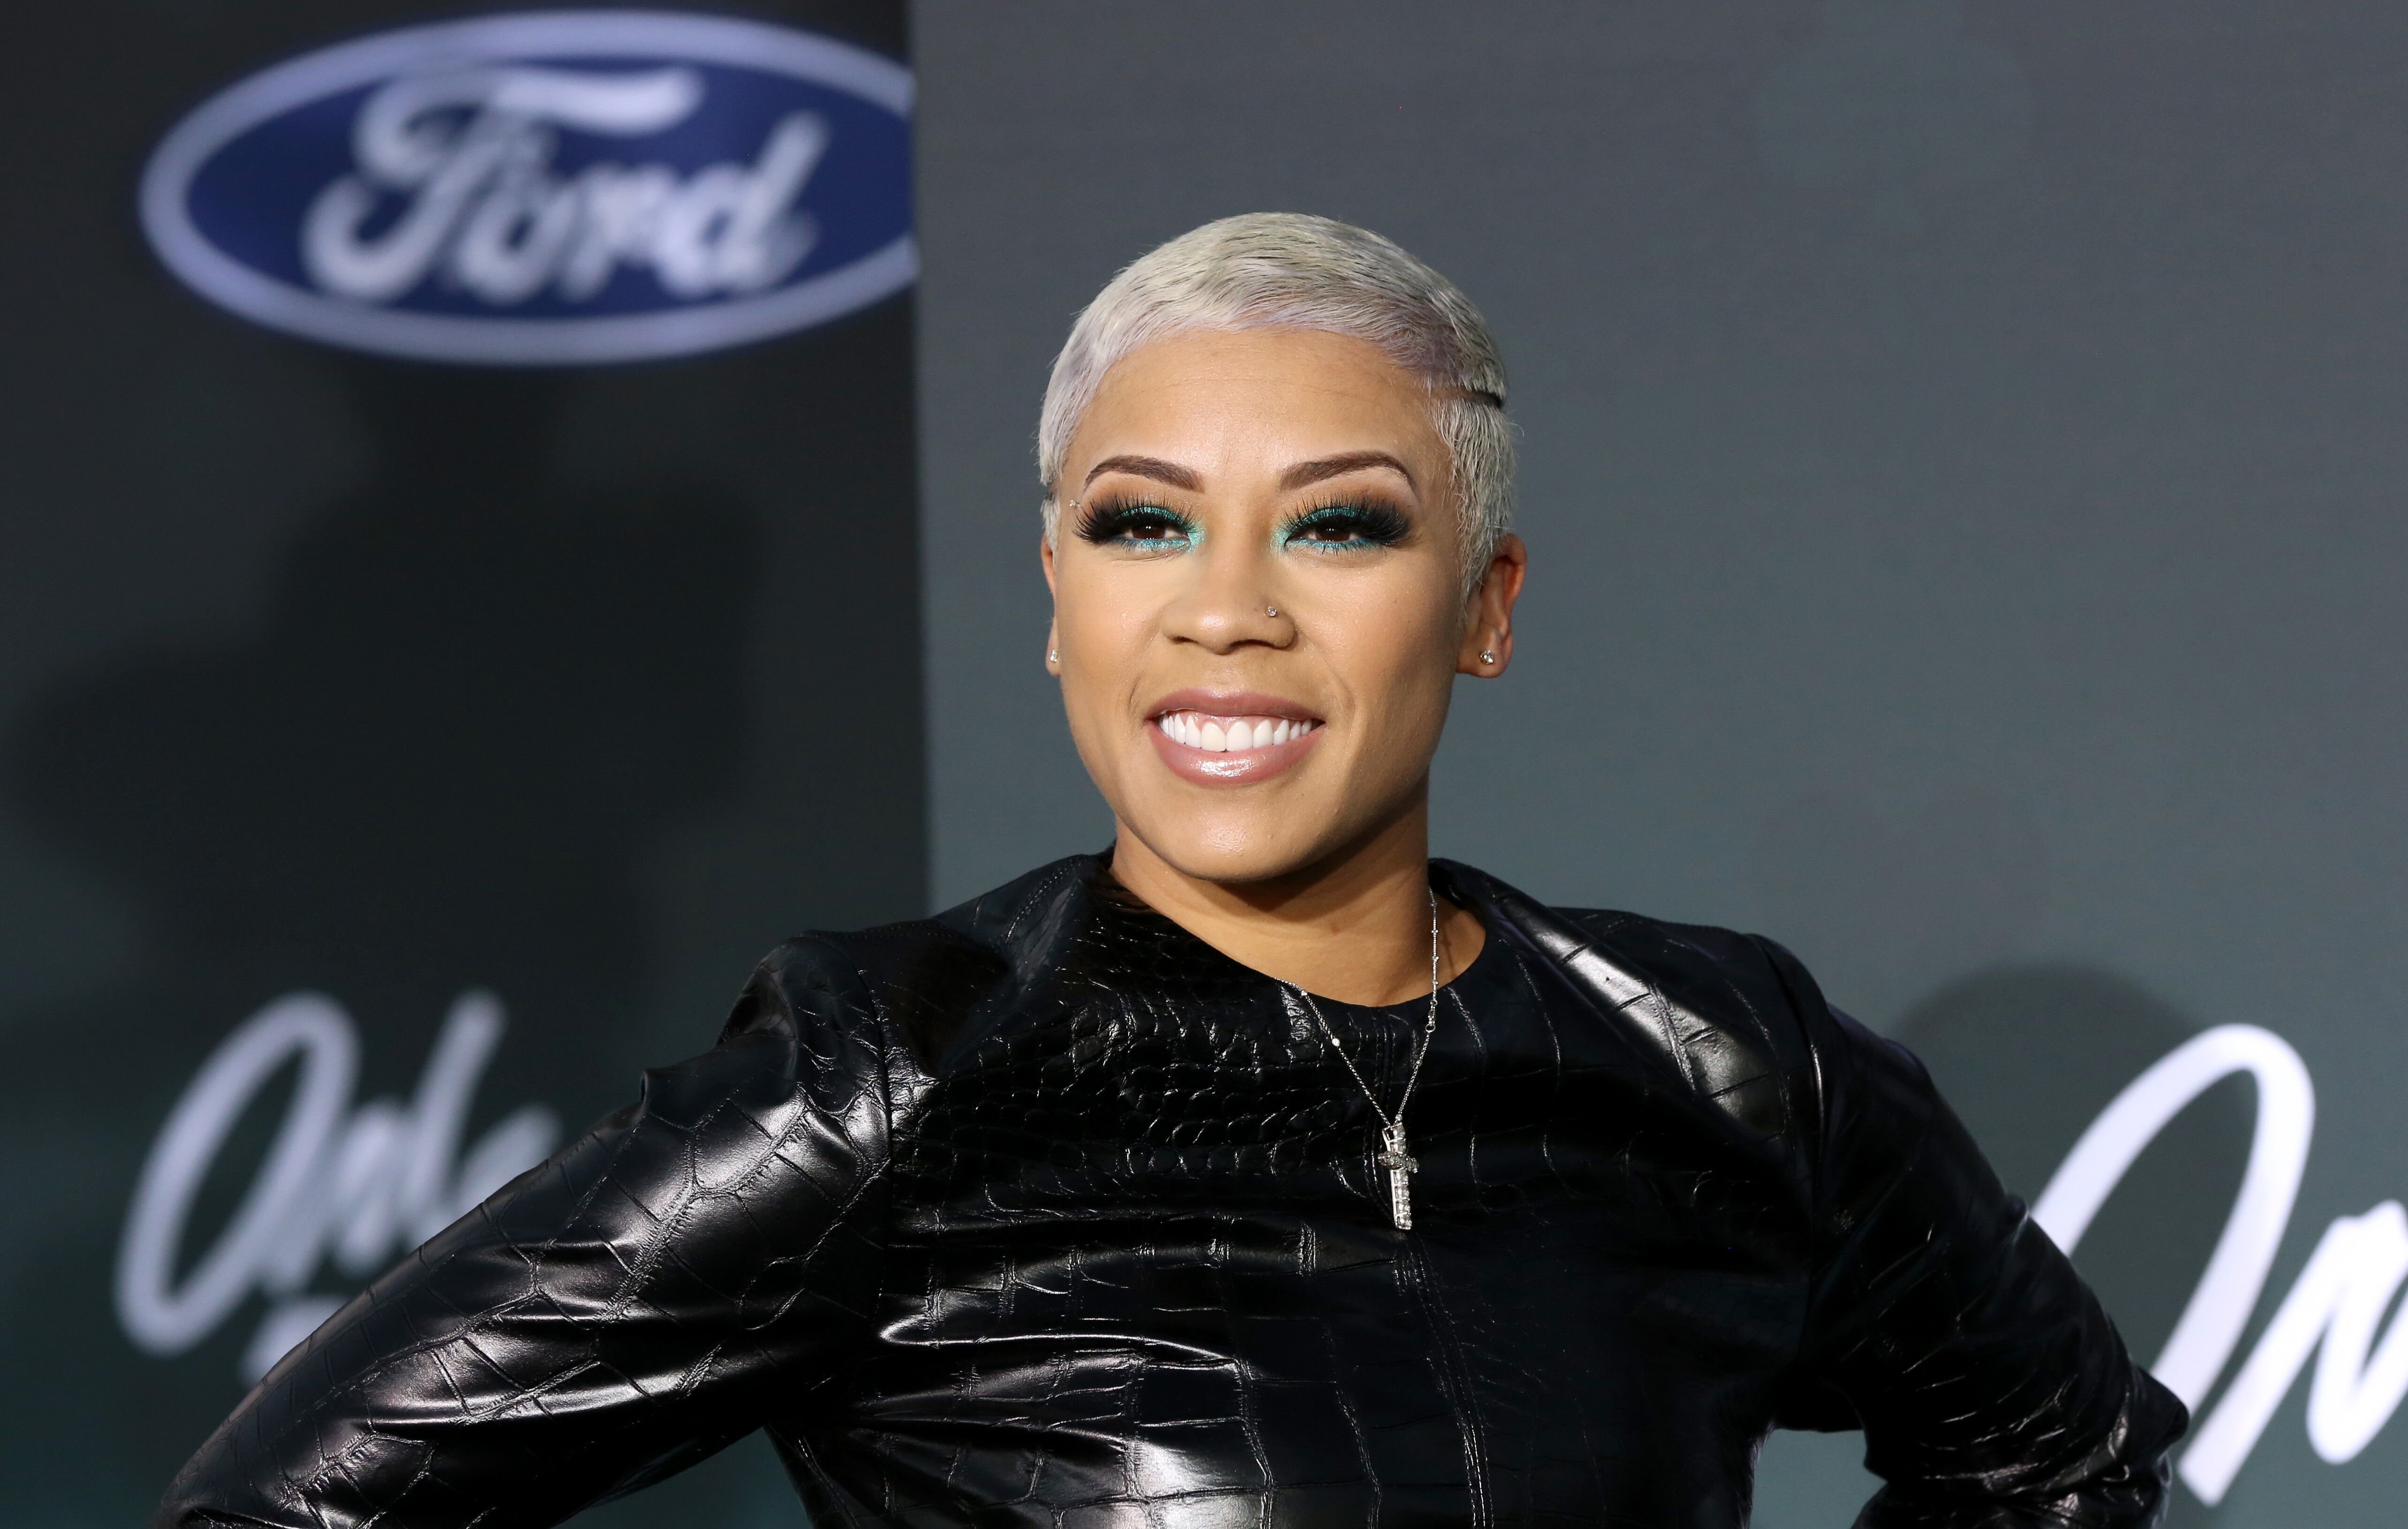 Keyshia Cole attends the Soul Train Awards at the Orleans Arena on November 17, 2019 | Photo: Getty Images